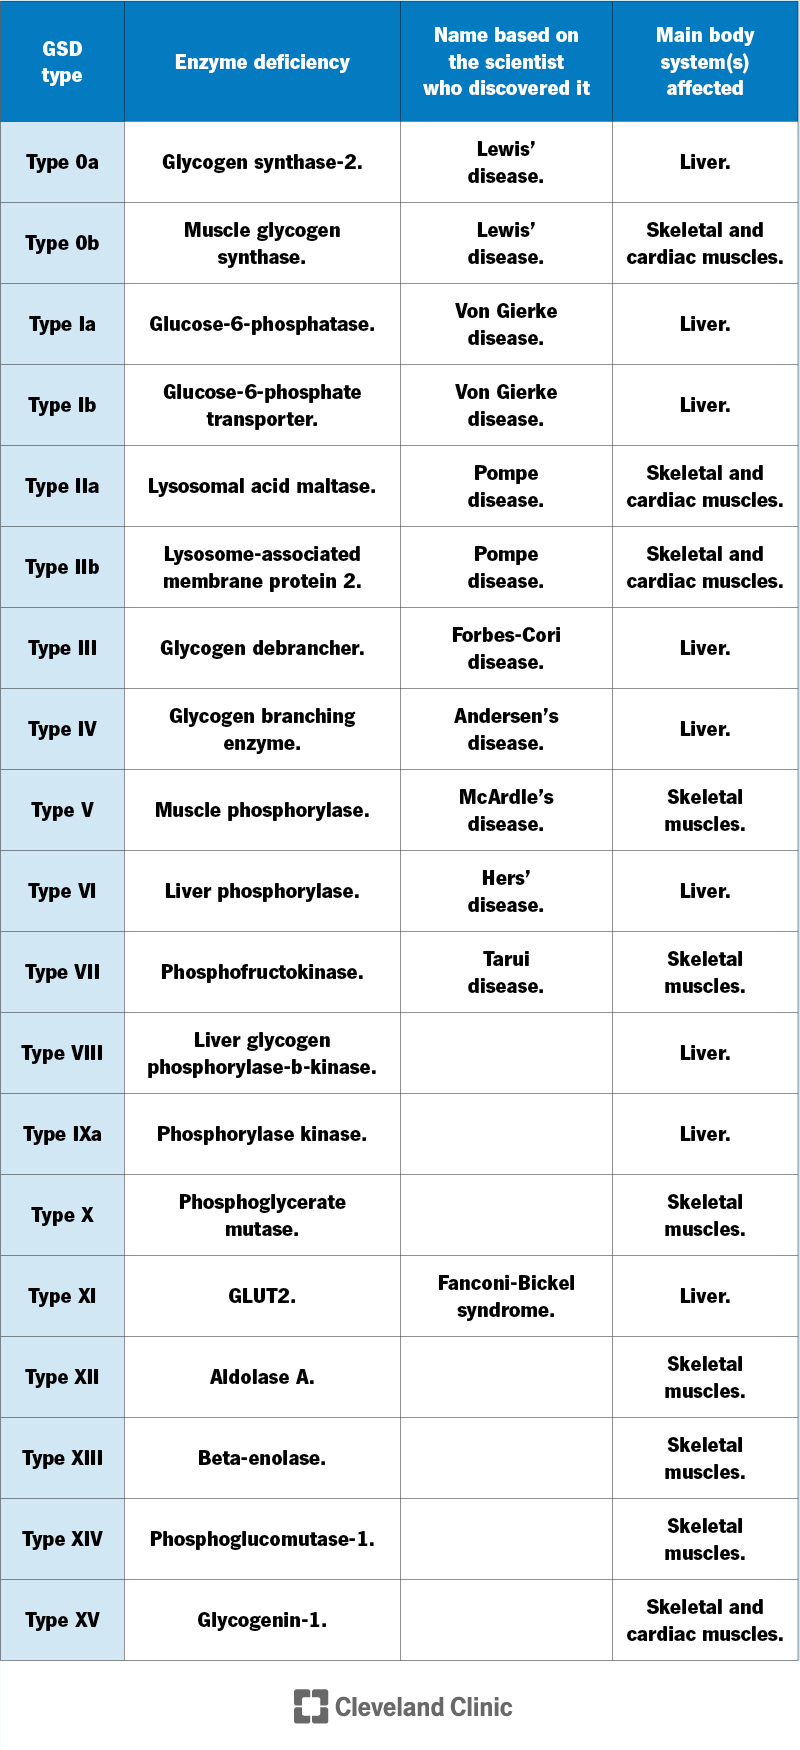 Chart listing 19 types of GSD with info on the enzyme deficiency, scientist who discoverd it and body systems affected.